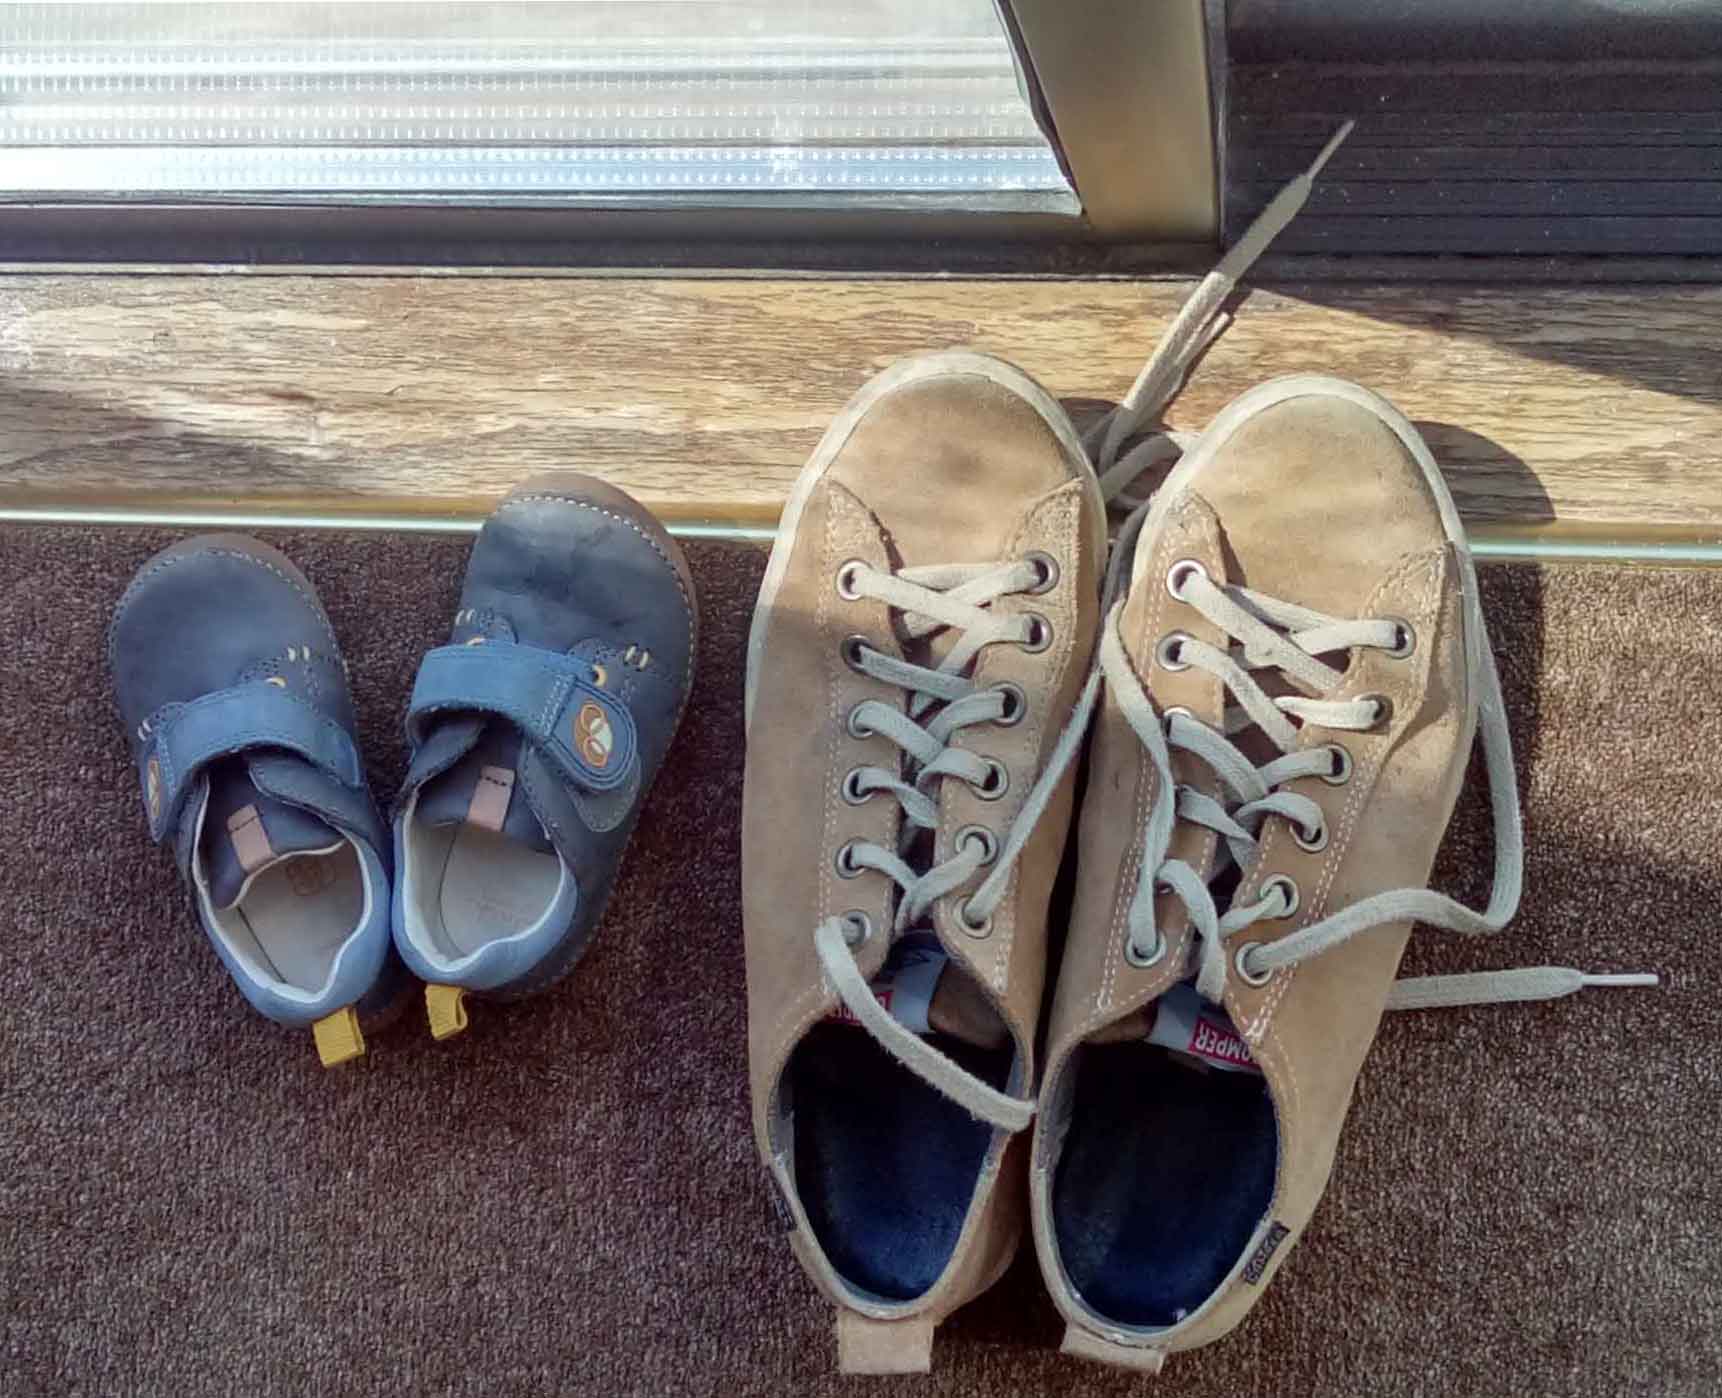 Baby shoes beside adult shoes